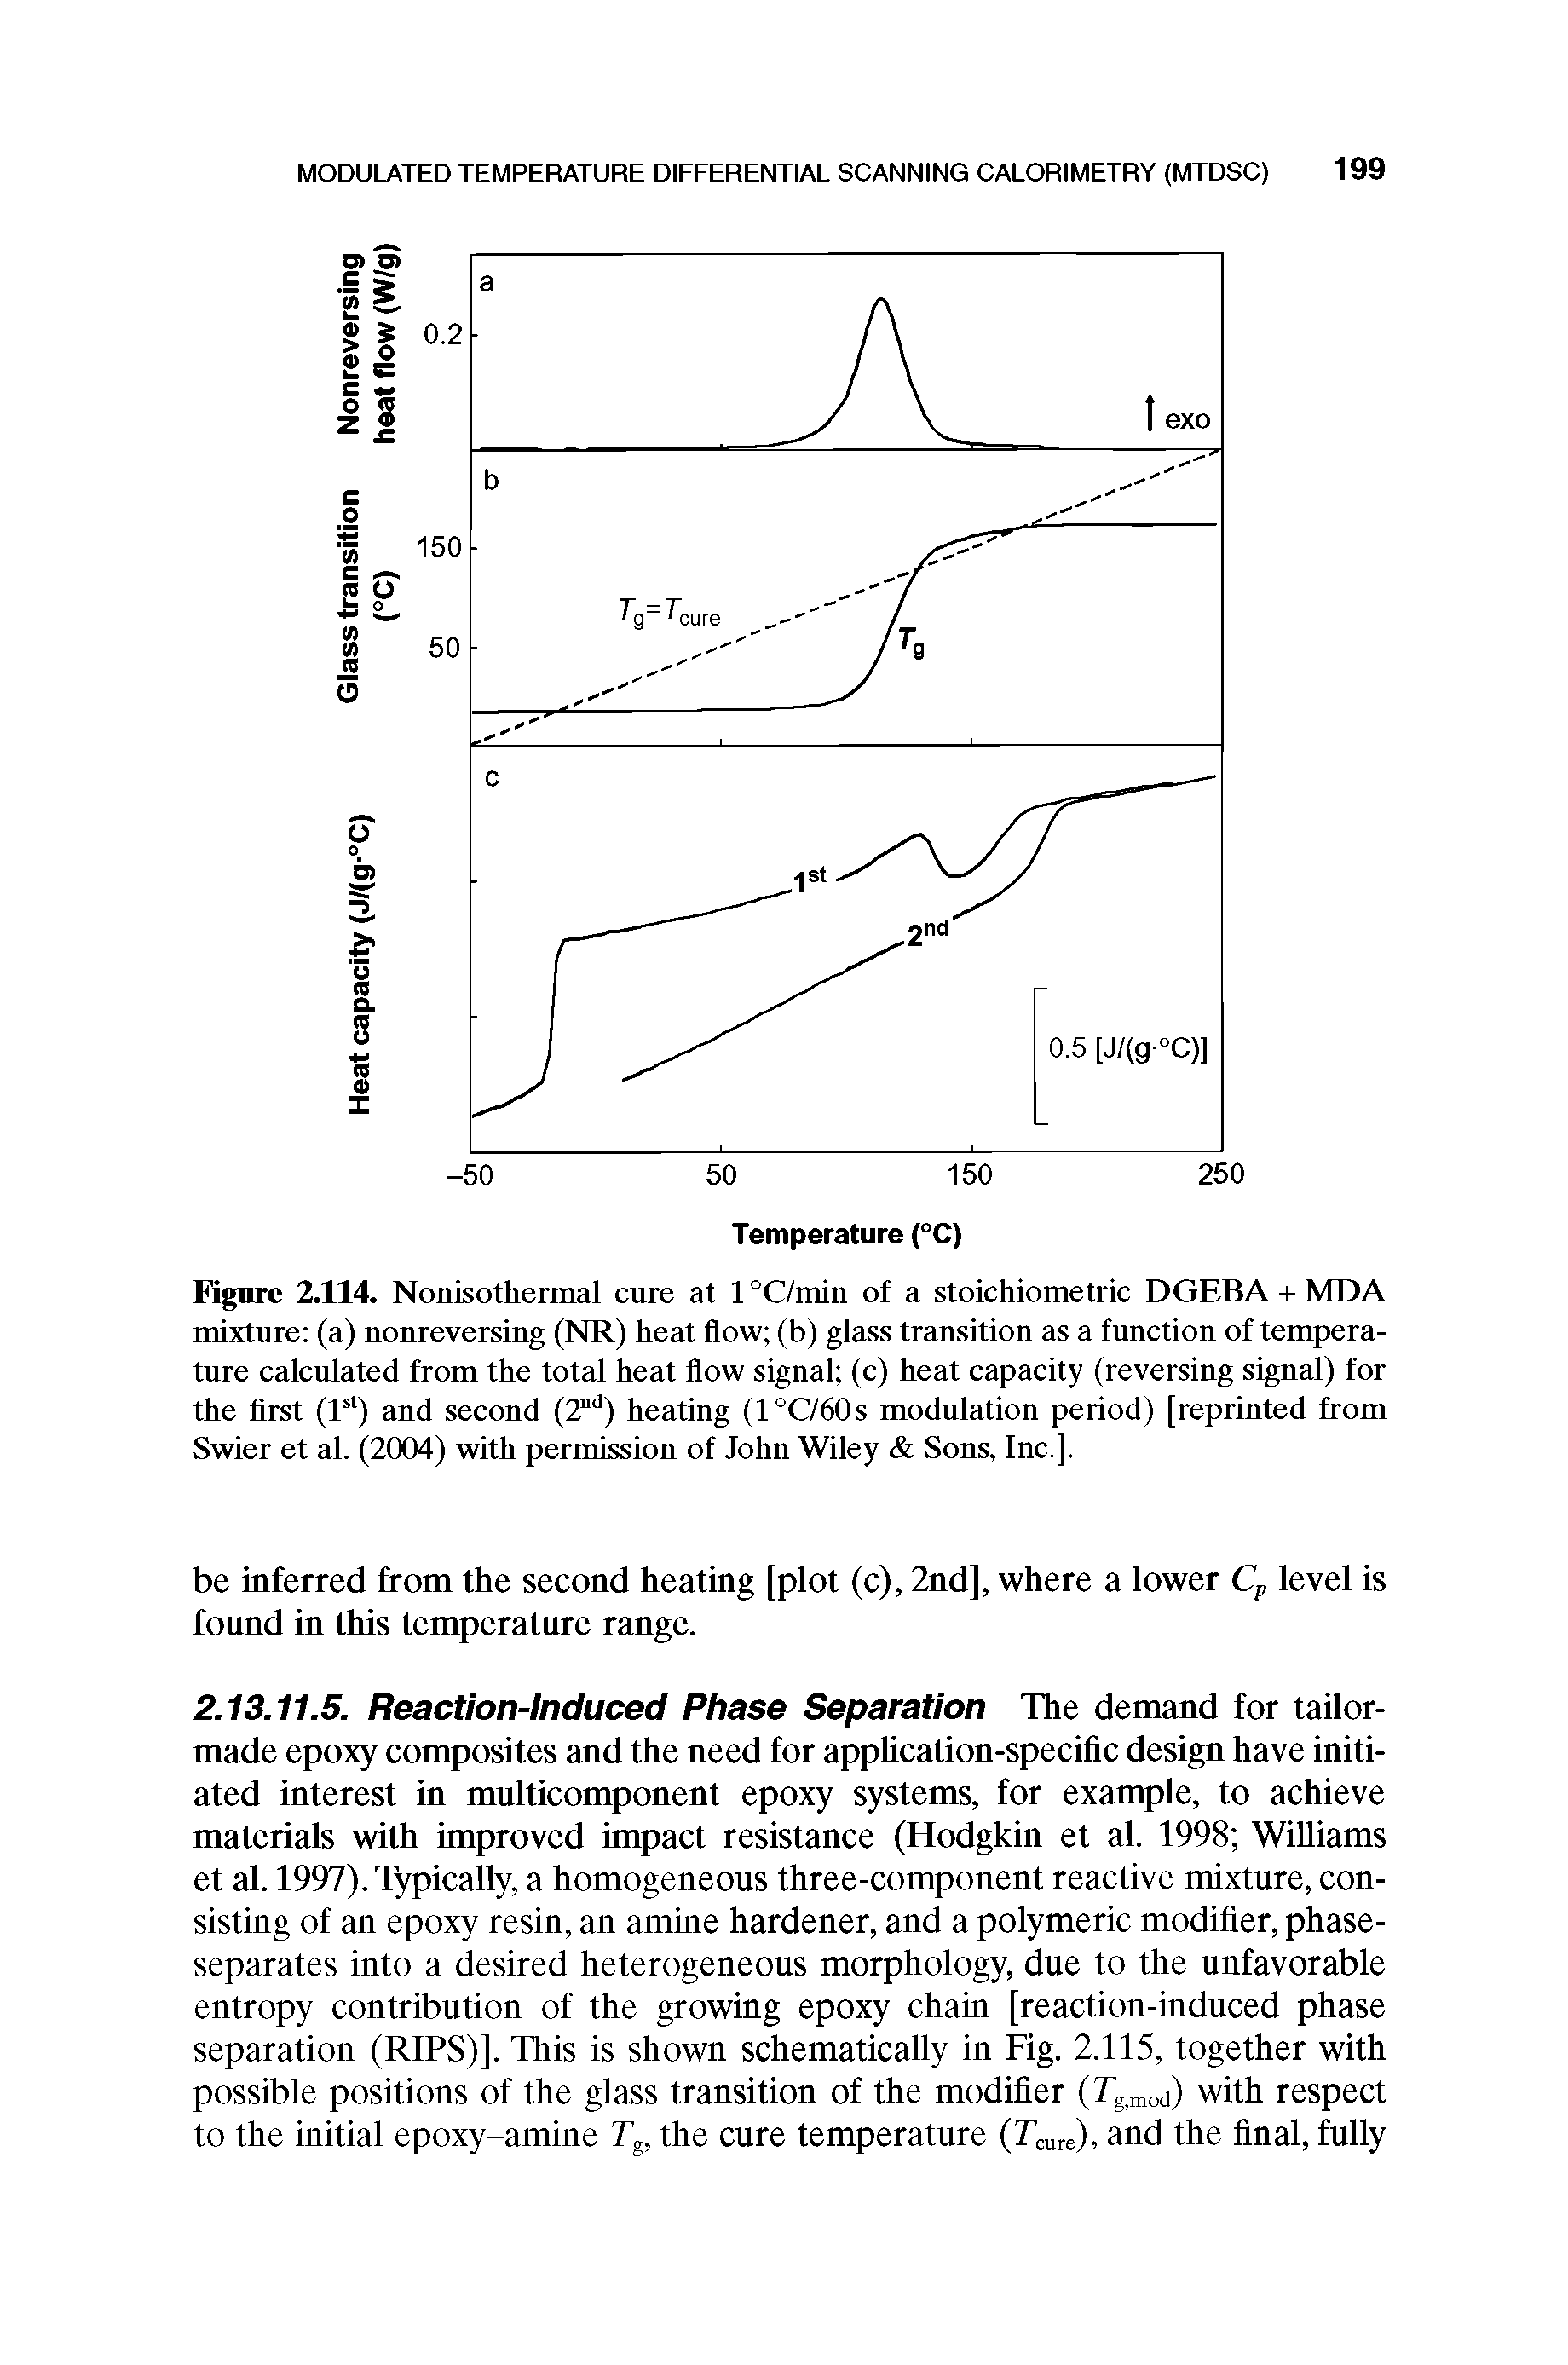 Figure 2.114. Nonisothermal cure at 1 °C/min of a stoichiometric DGEBA + MDA mixture (a) nonreversing (NR) heat flow (b) glass transition as a function of temperature calculated from the total heat flow signal (c) heat capacity (reversing signal) for the first (1 ) and second (2 ) heating (l°C/60s modulation period) [reprinted from Swier et al. (2004) with permission of John Wiley Sons, Inc.].